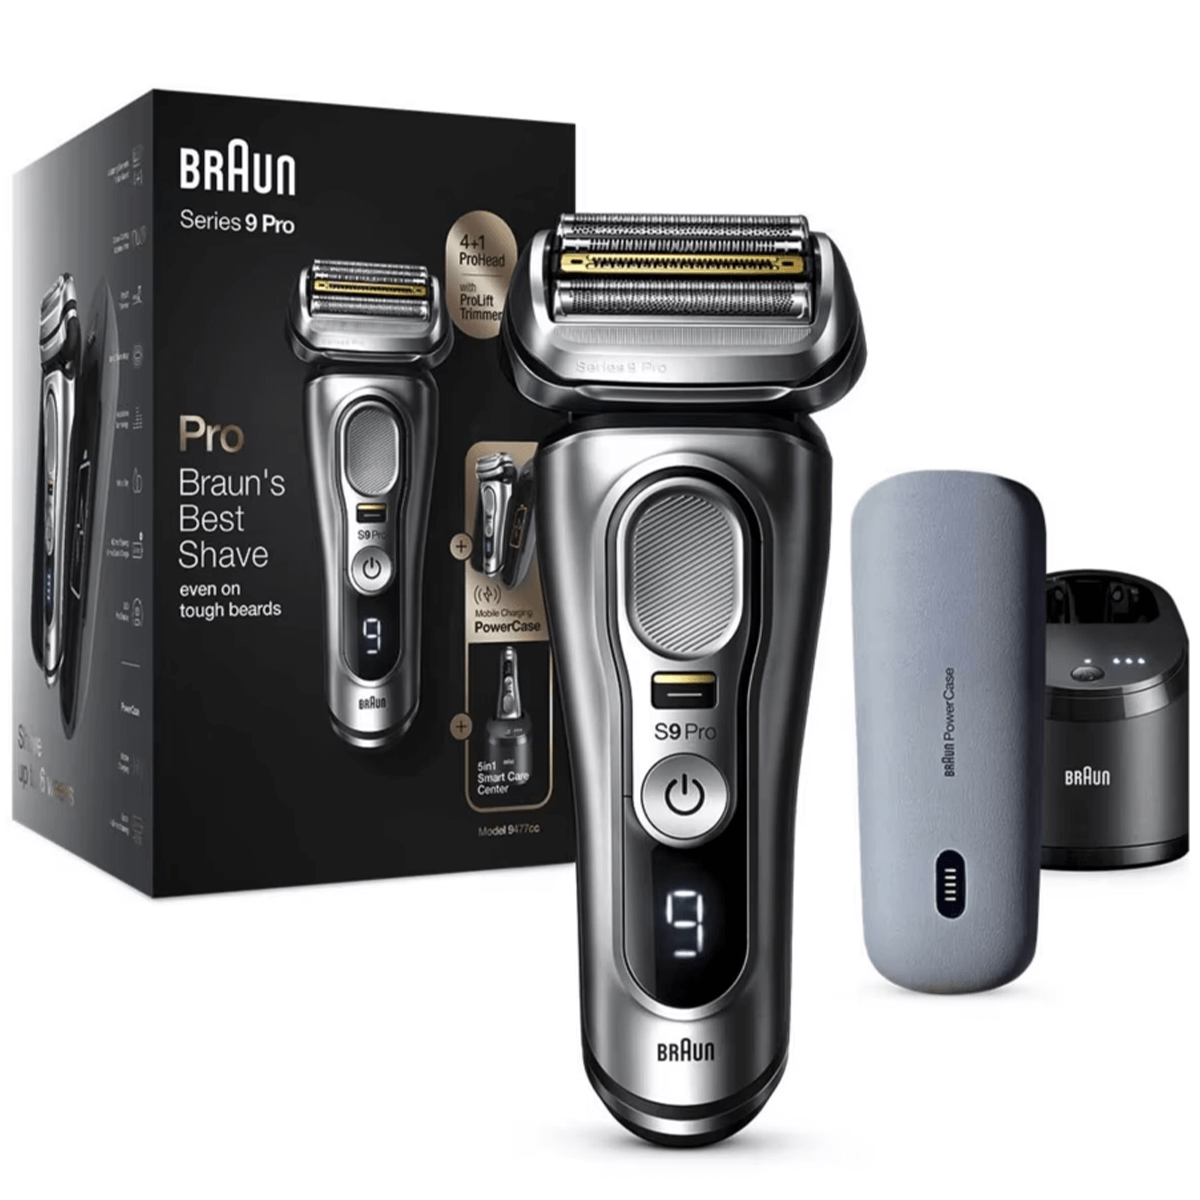 Braun Series 9 Pro 9470cc Cordless Electric Shaver w/ Power Case ⭐Tracking⭐